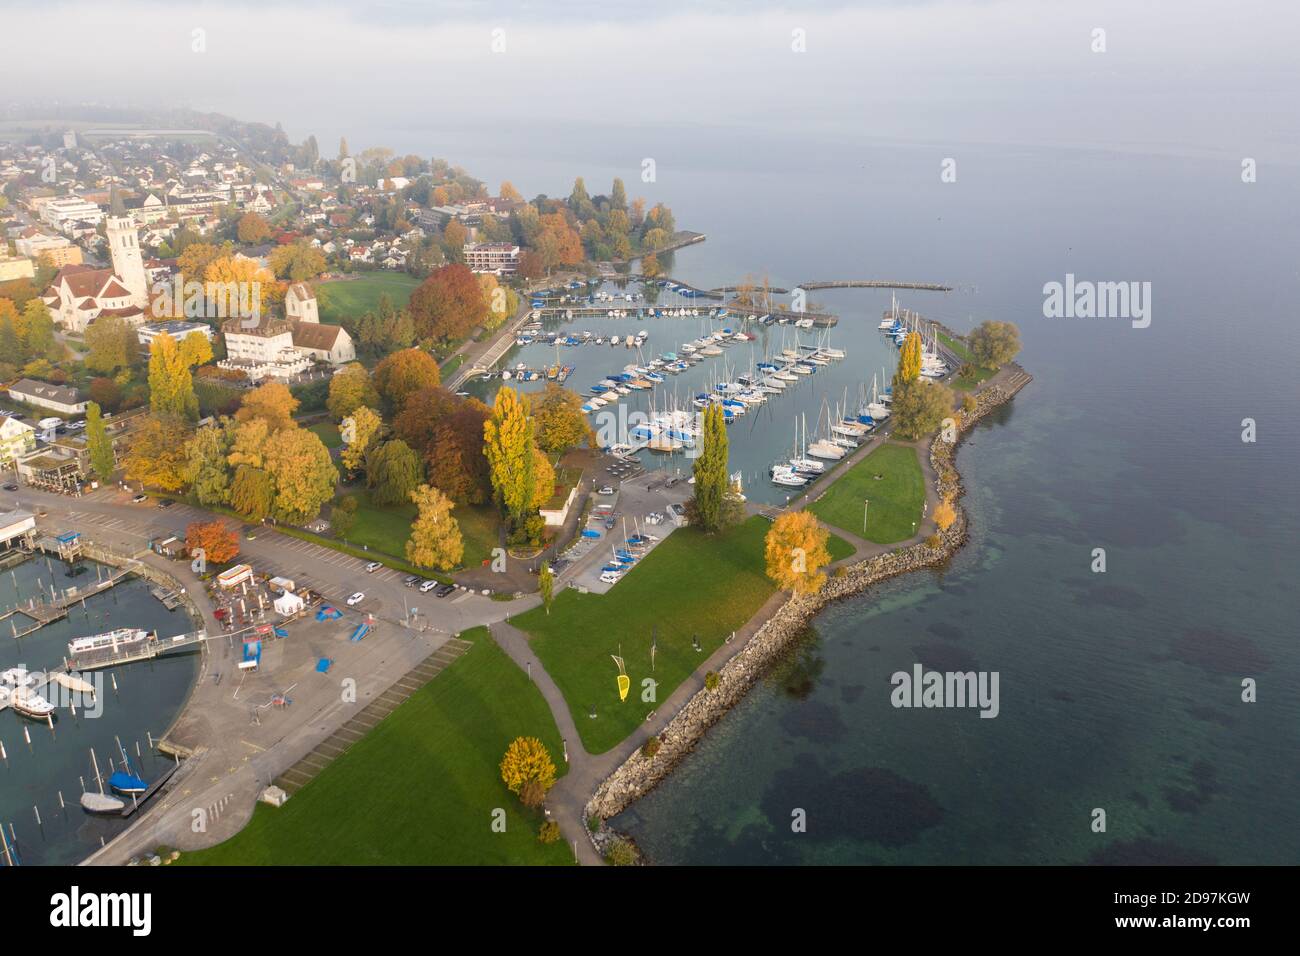 Aerial View, Drone Image of Romanshorn, Bodensee Switzerland Stock Photo